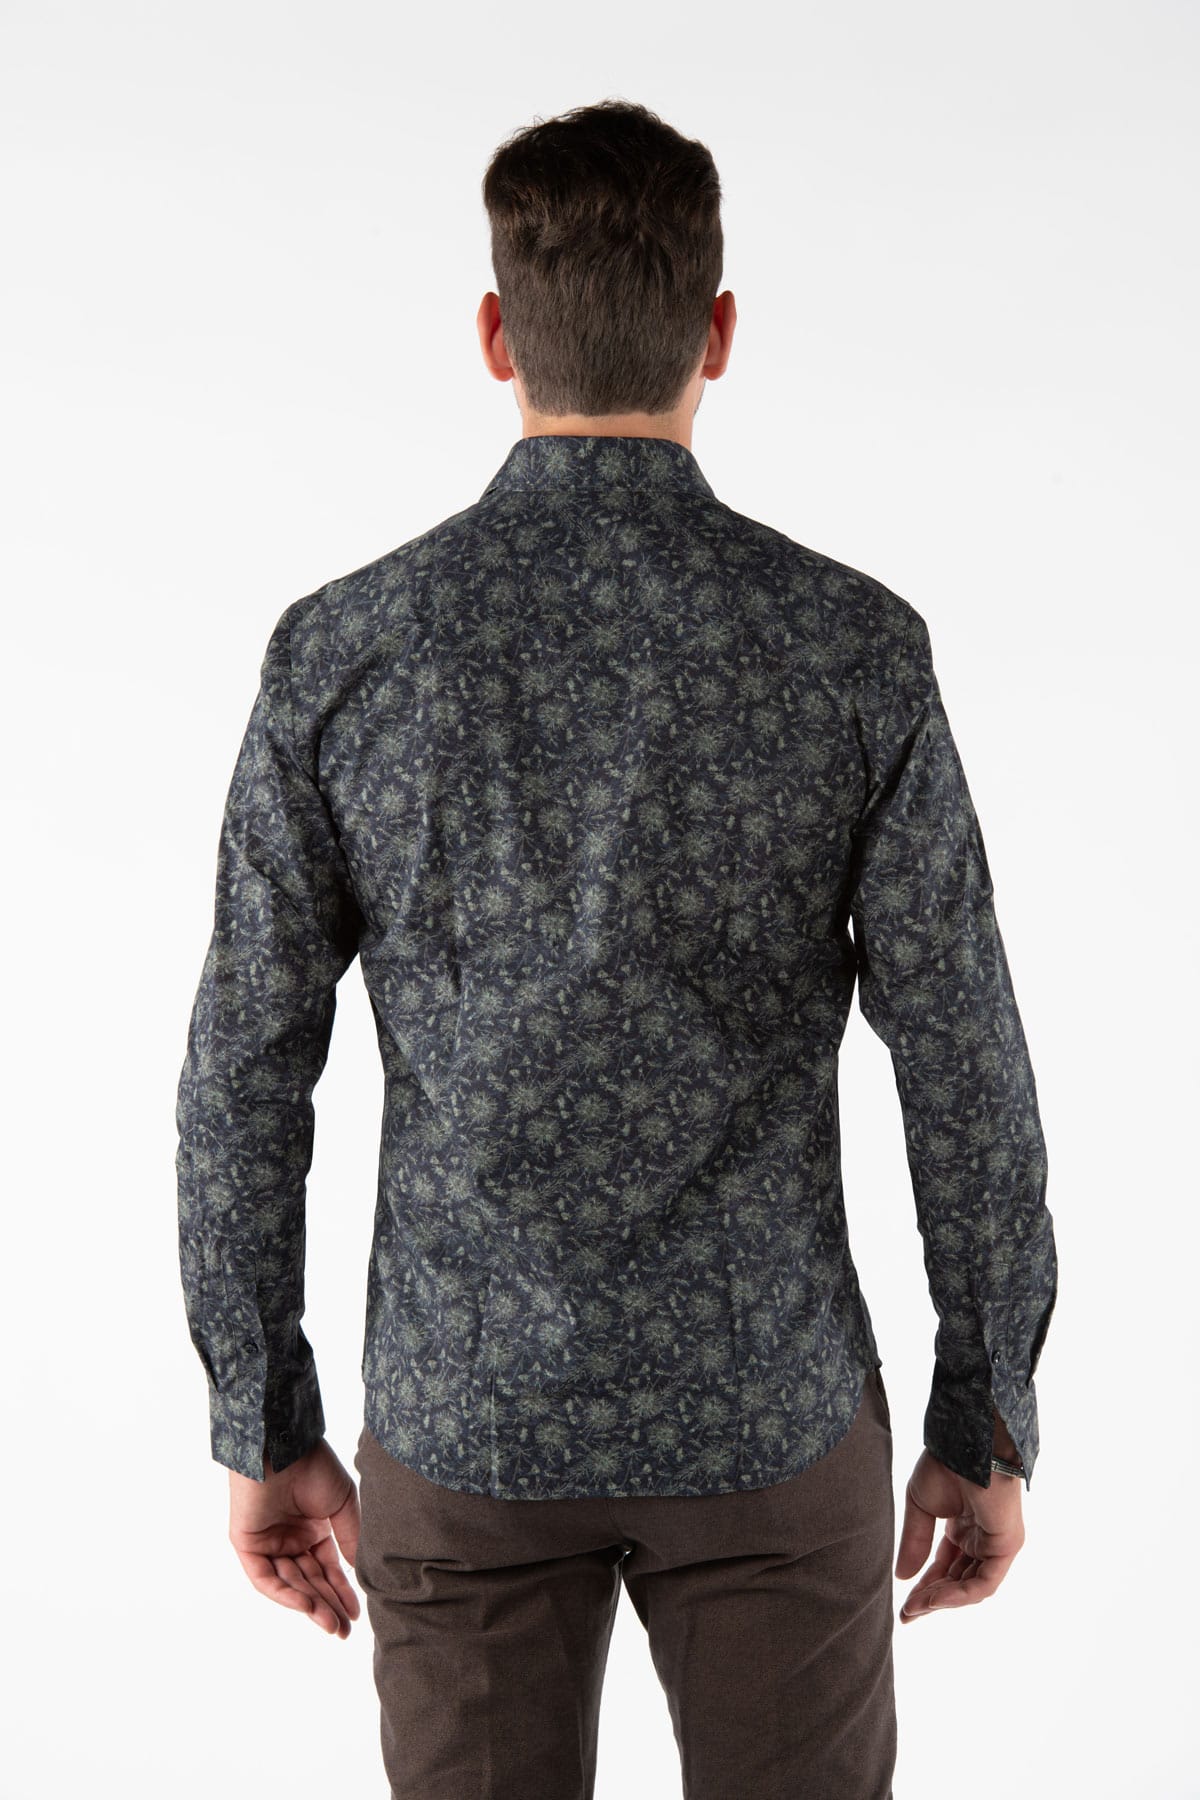 Casual patterned men's shirt